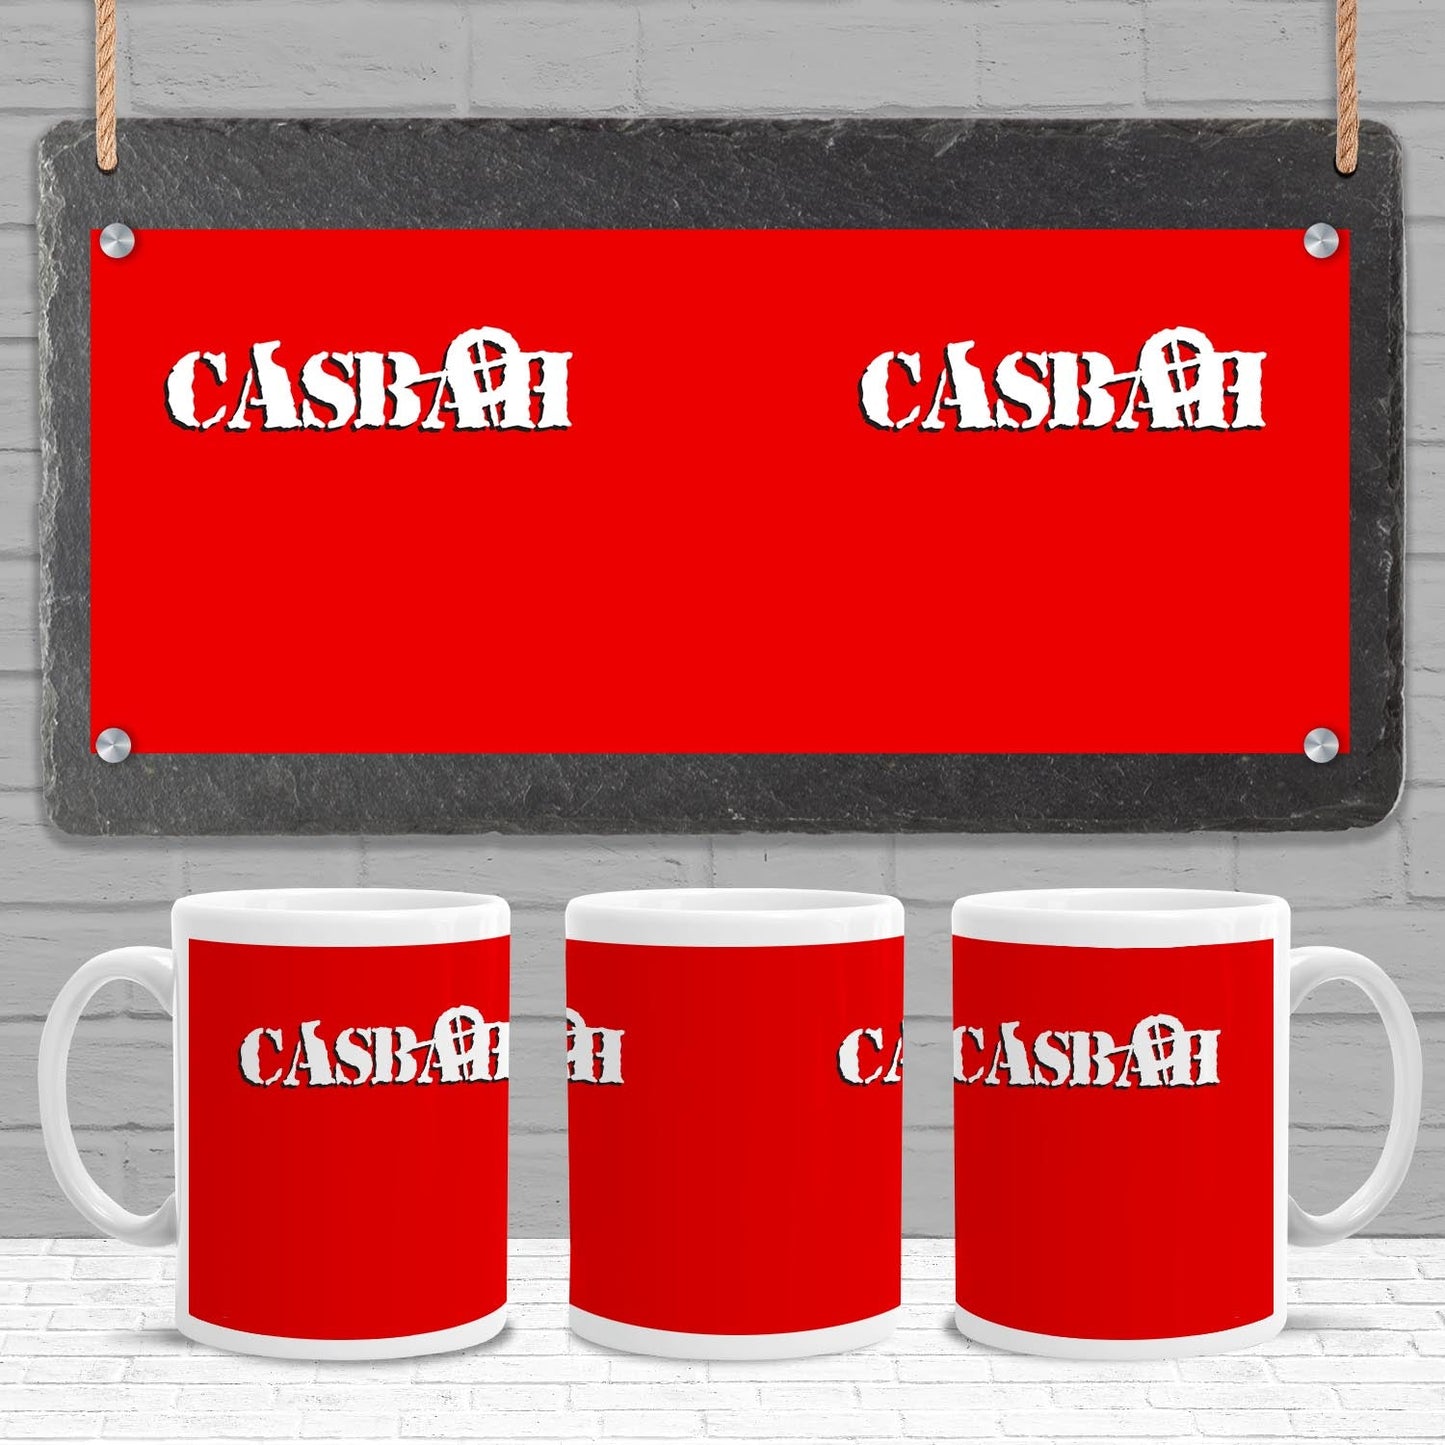 Casbah mug - Dirty Stop Outs